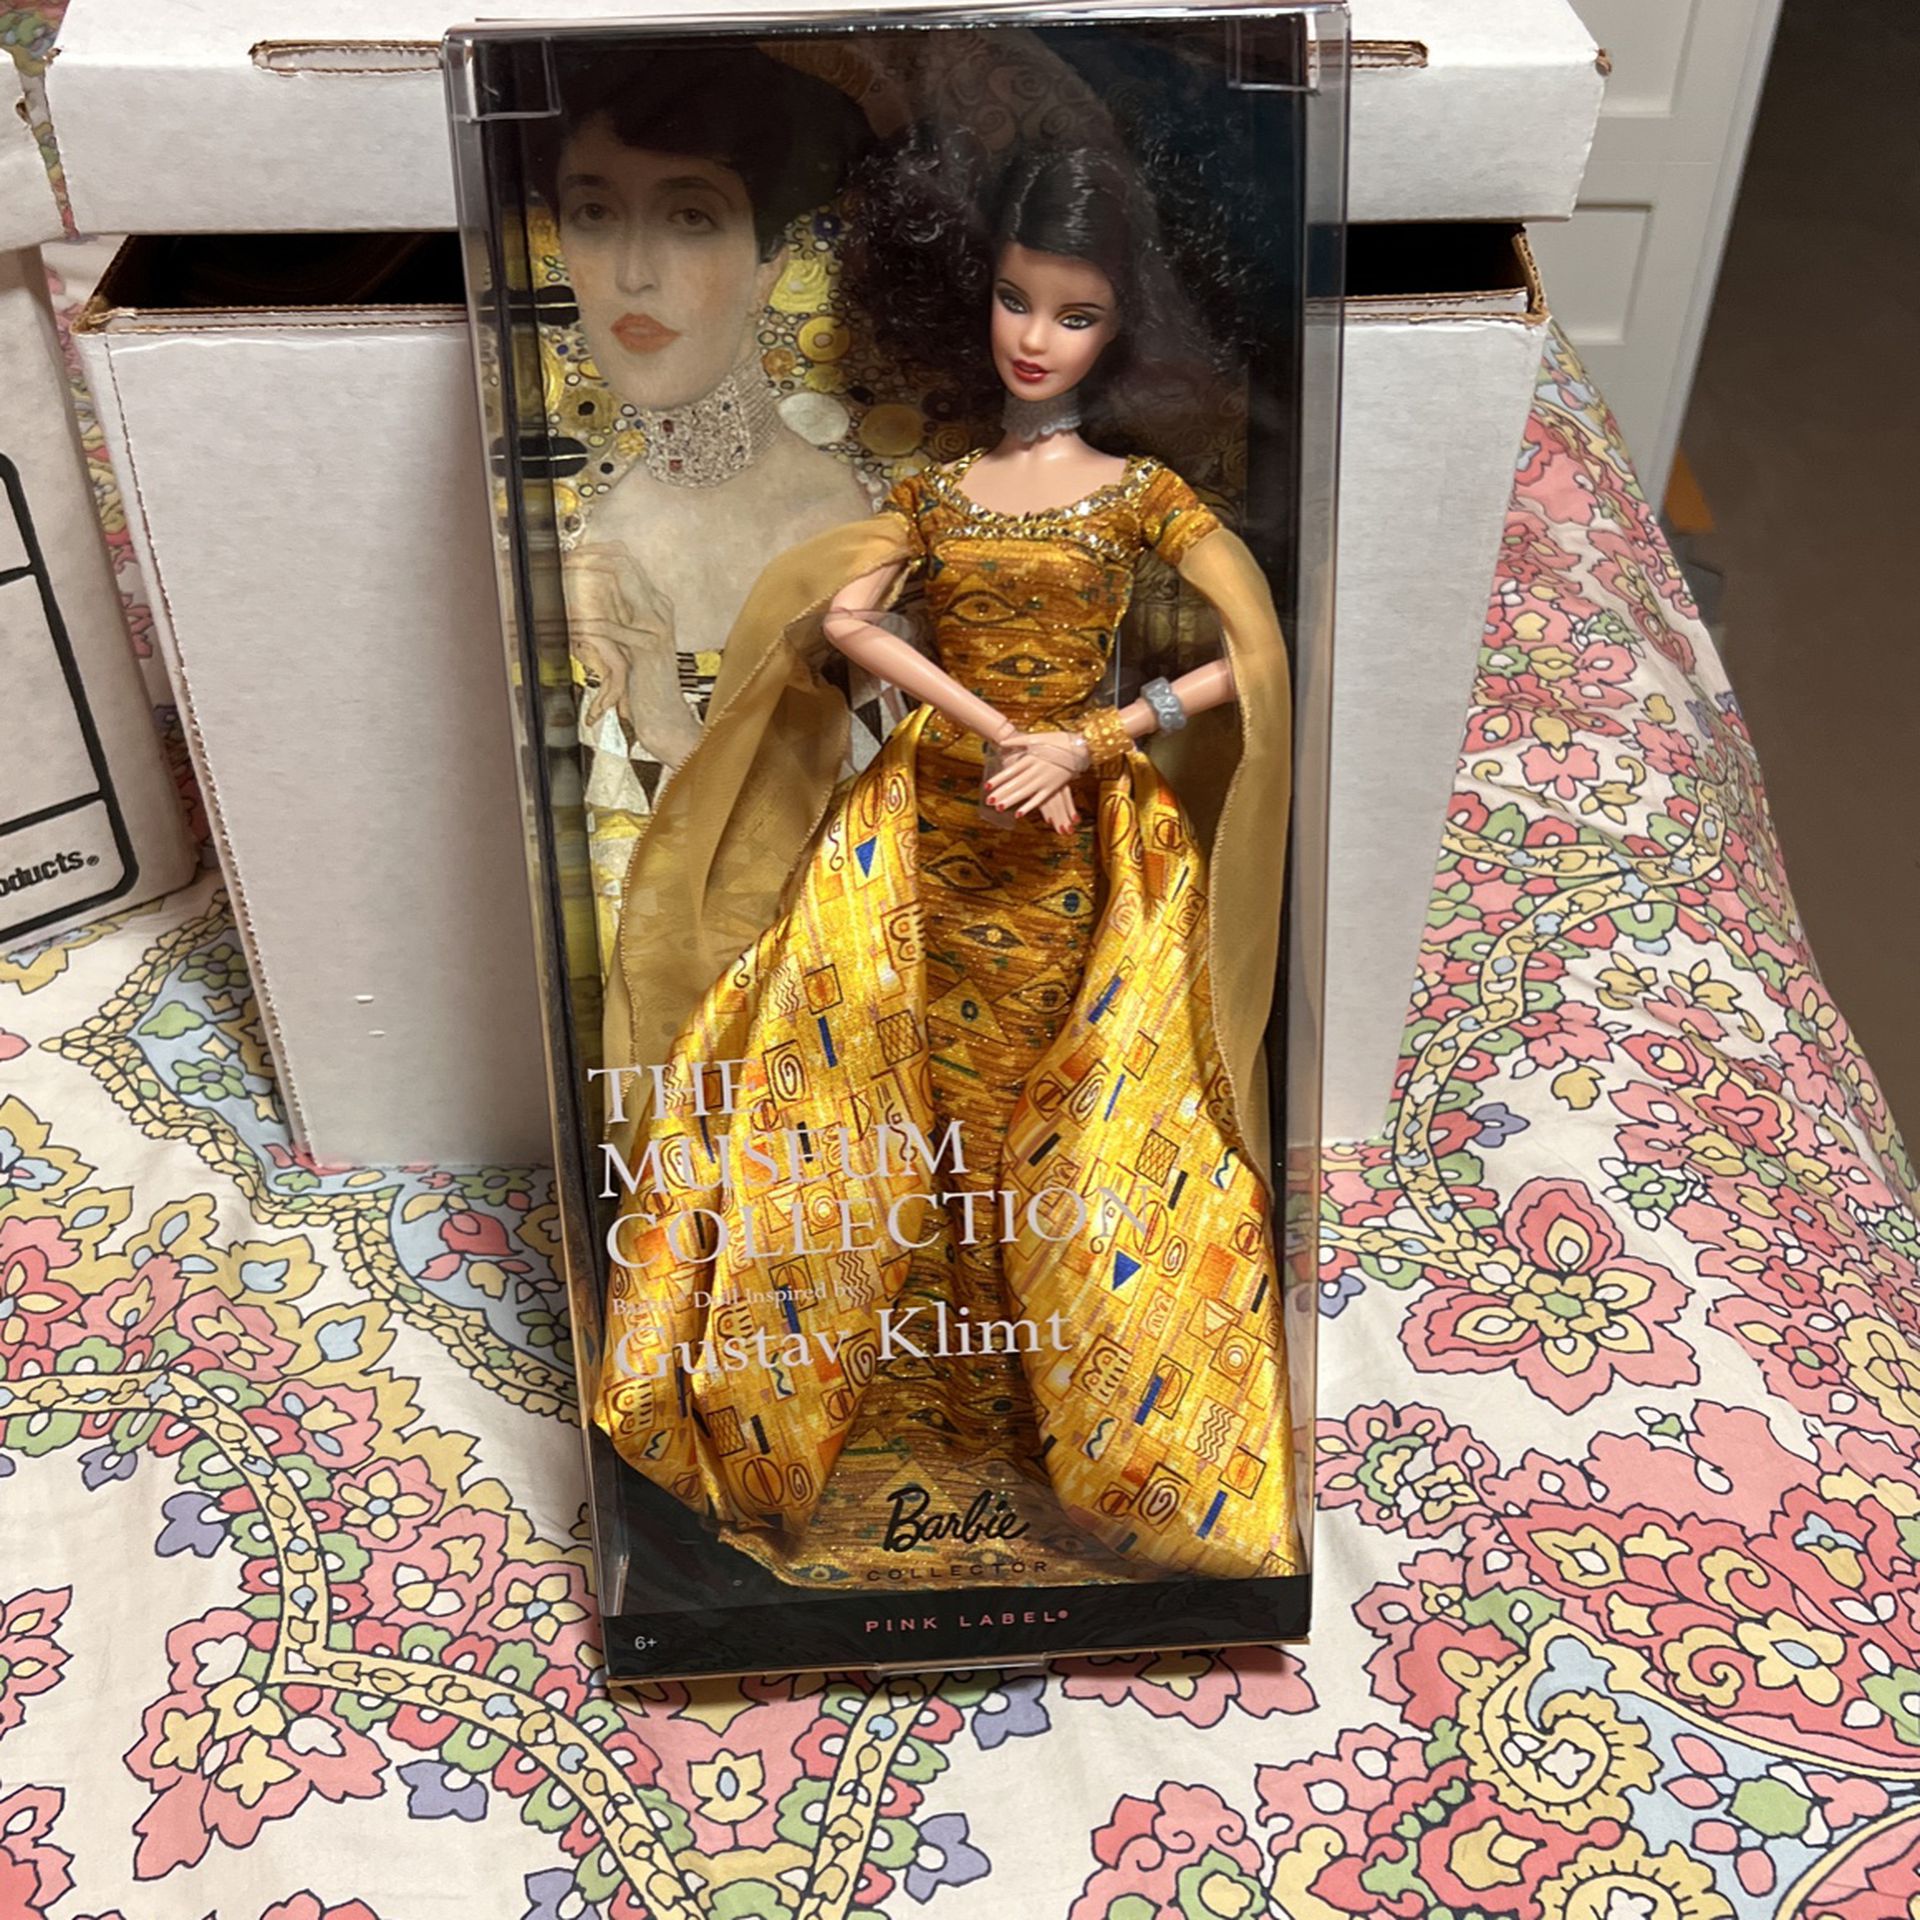 Barbie Doll The Museum Collection Inspired by The Kiss by Gustav Klimt